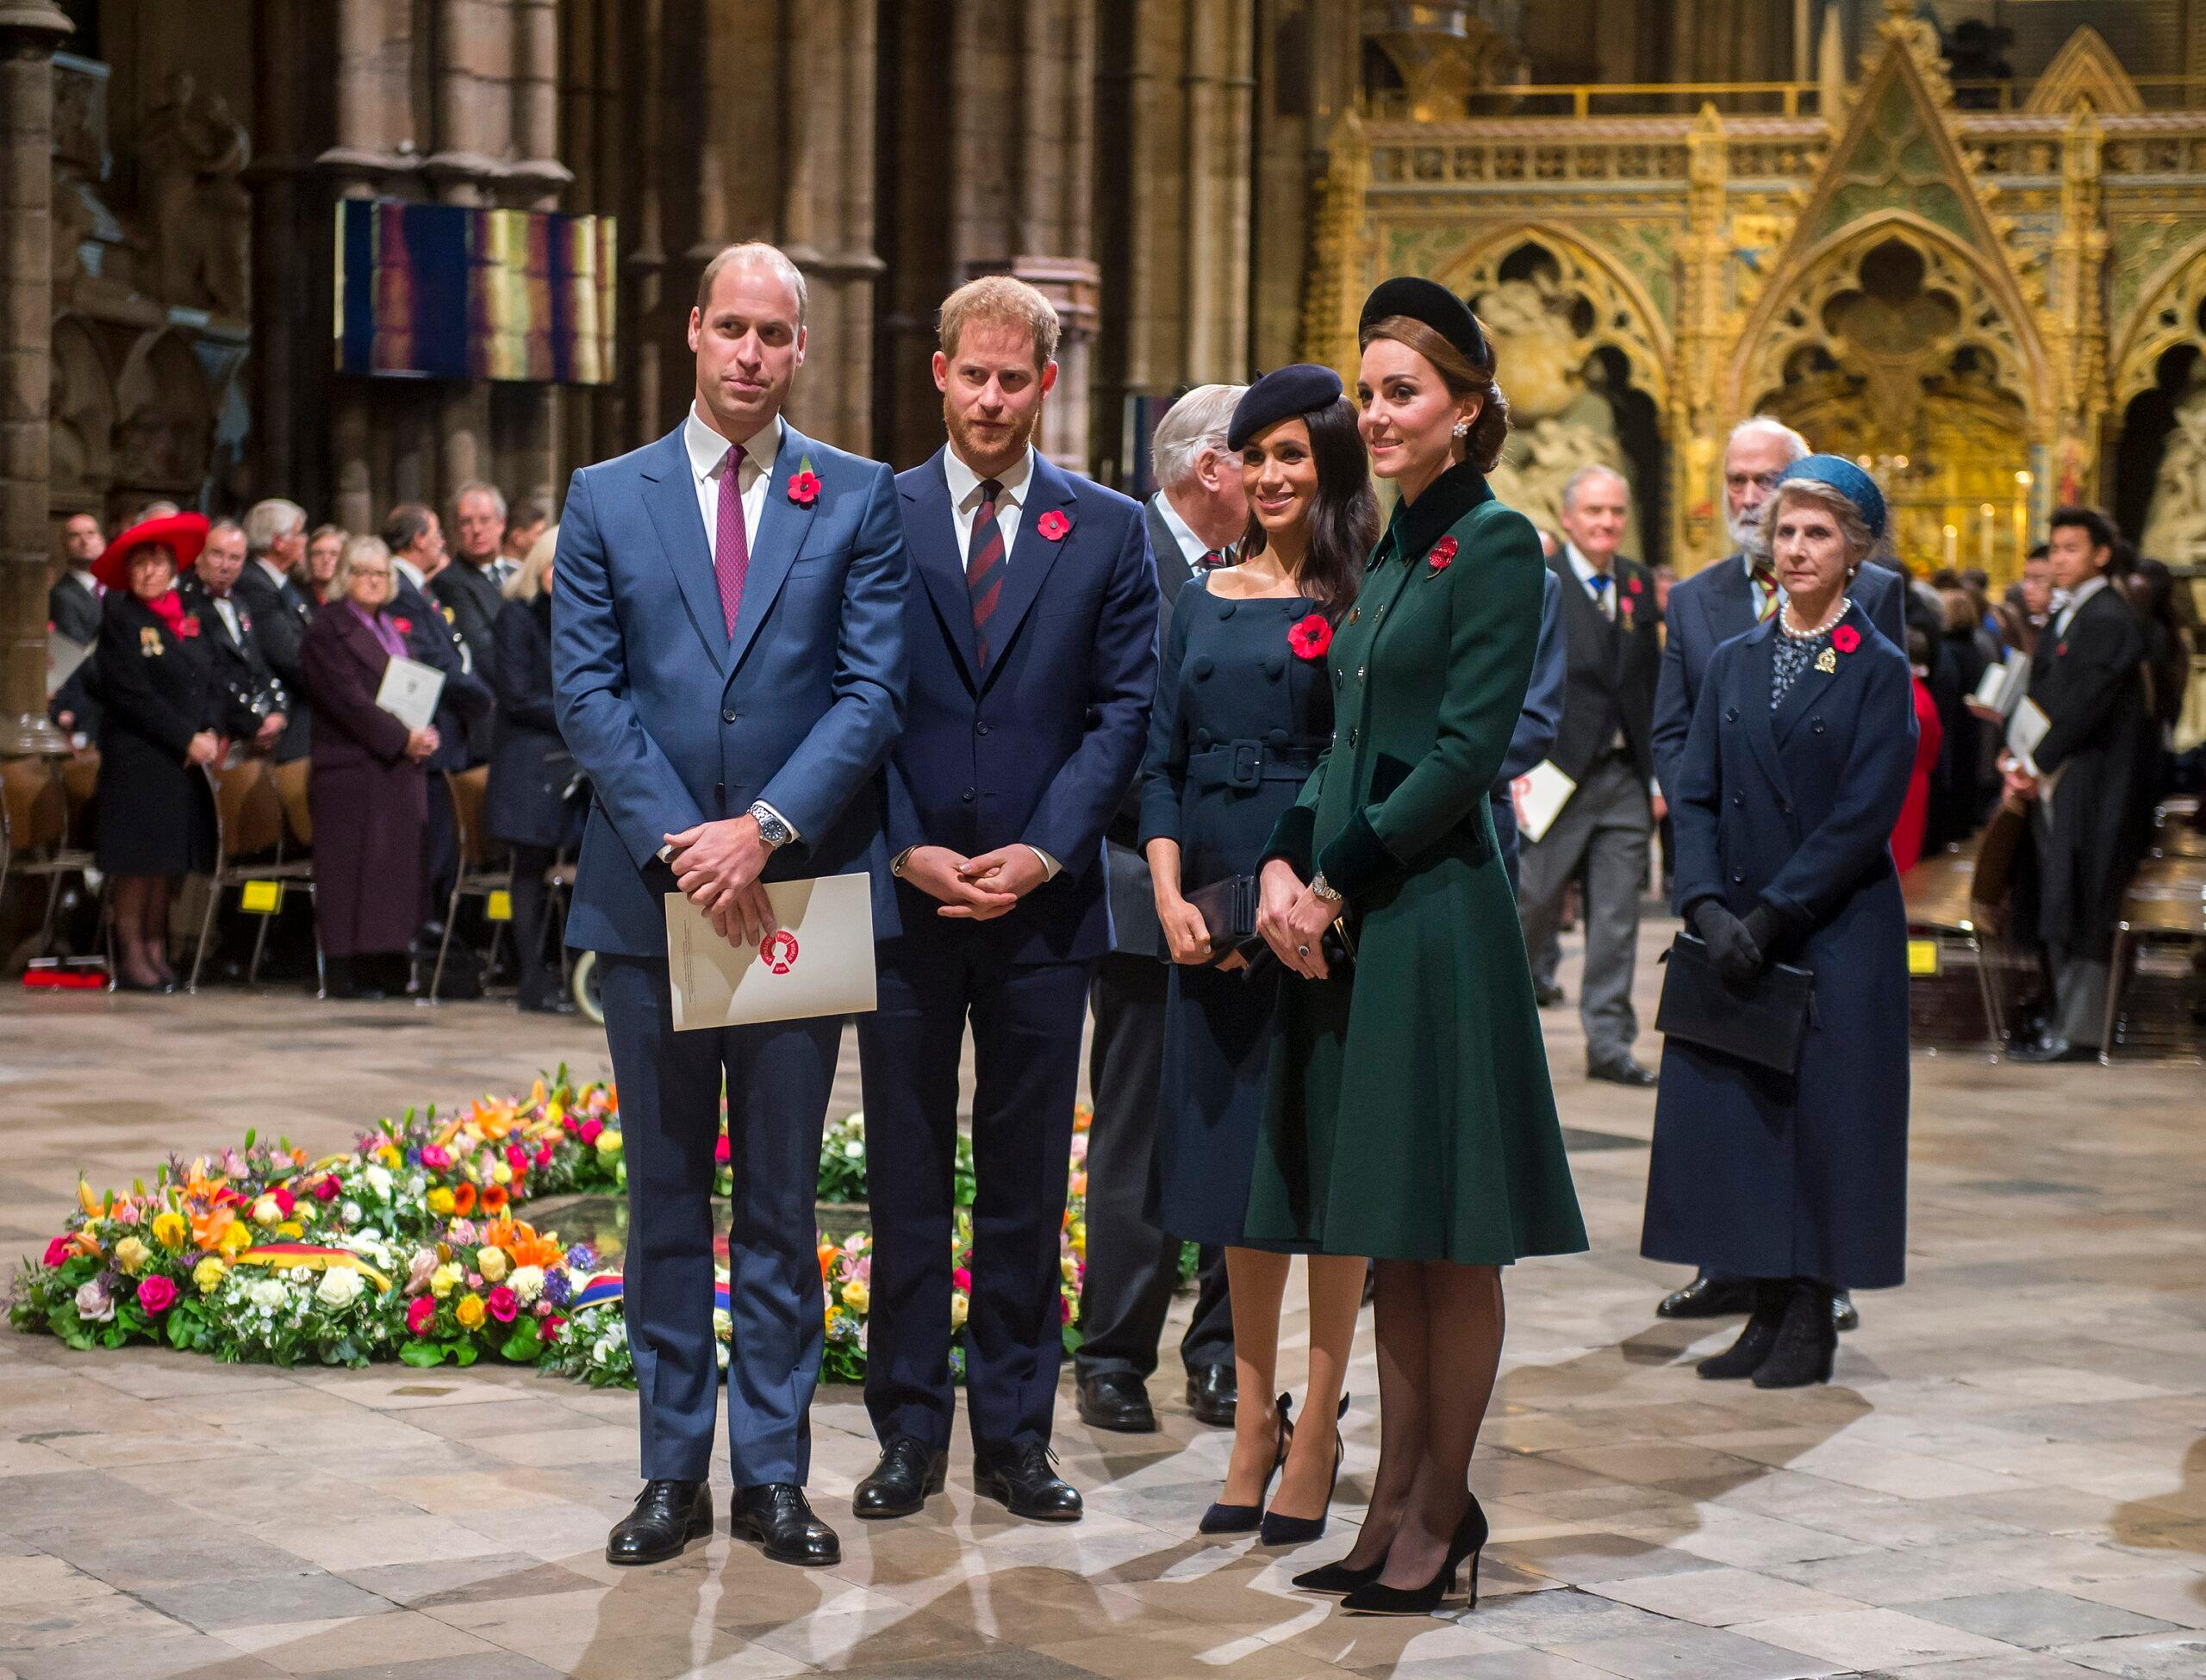 (Left) Prince William, Prince Harry, Meghan Markle, and Kate Middleton